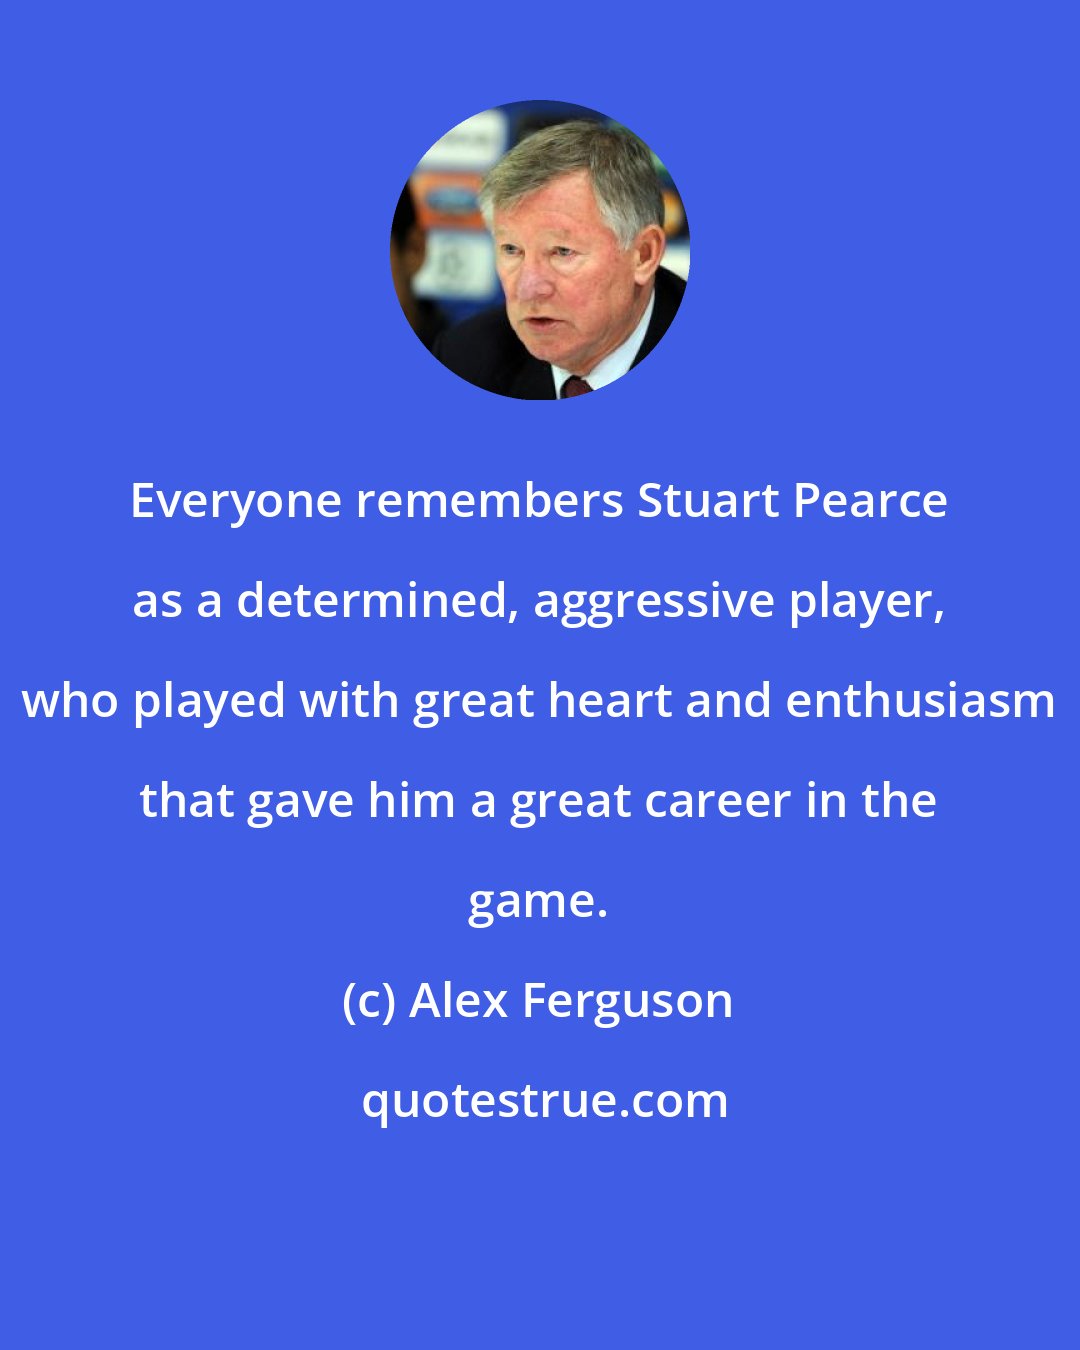 Alex Ferguson: Everyone remembers Stuart Pearce as a determined, aggressive player, who played with great heart and enthusiasm that gave him a great career in the game.